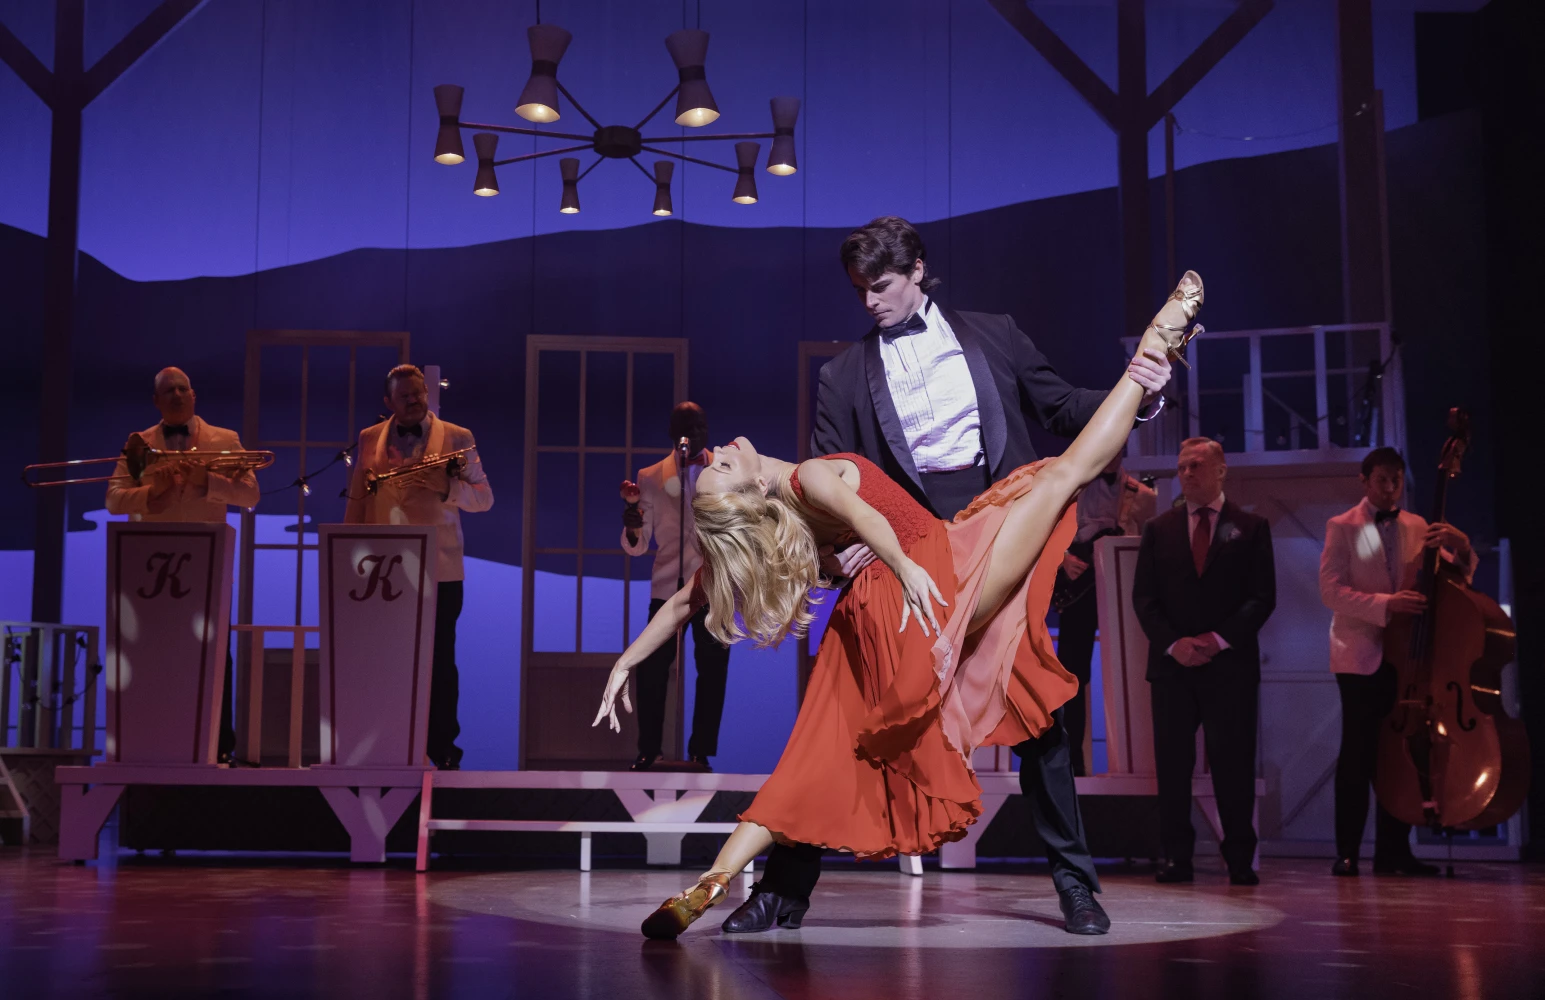 Dirty Dancing - The Classic Story on Stage: What to expect - 2